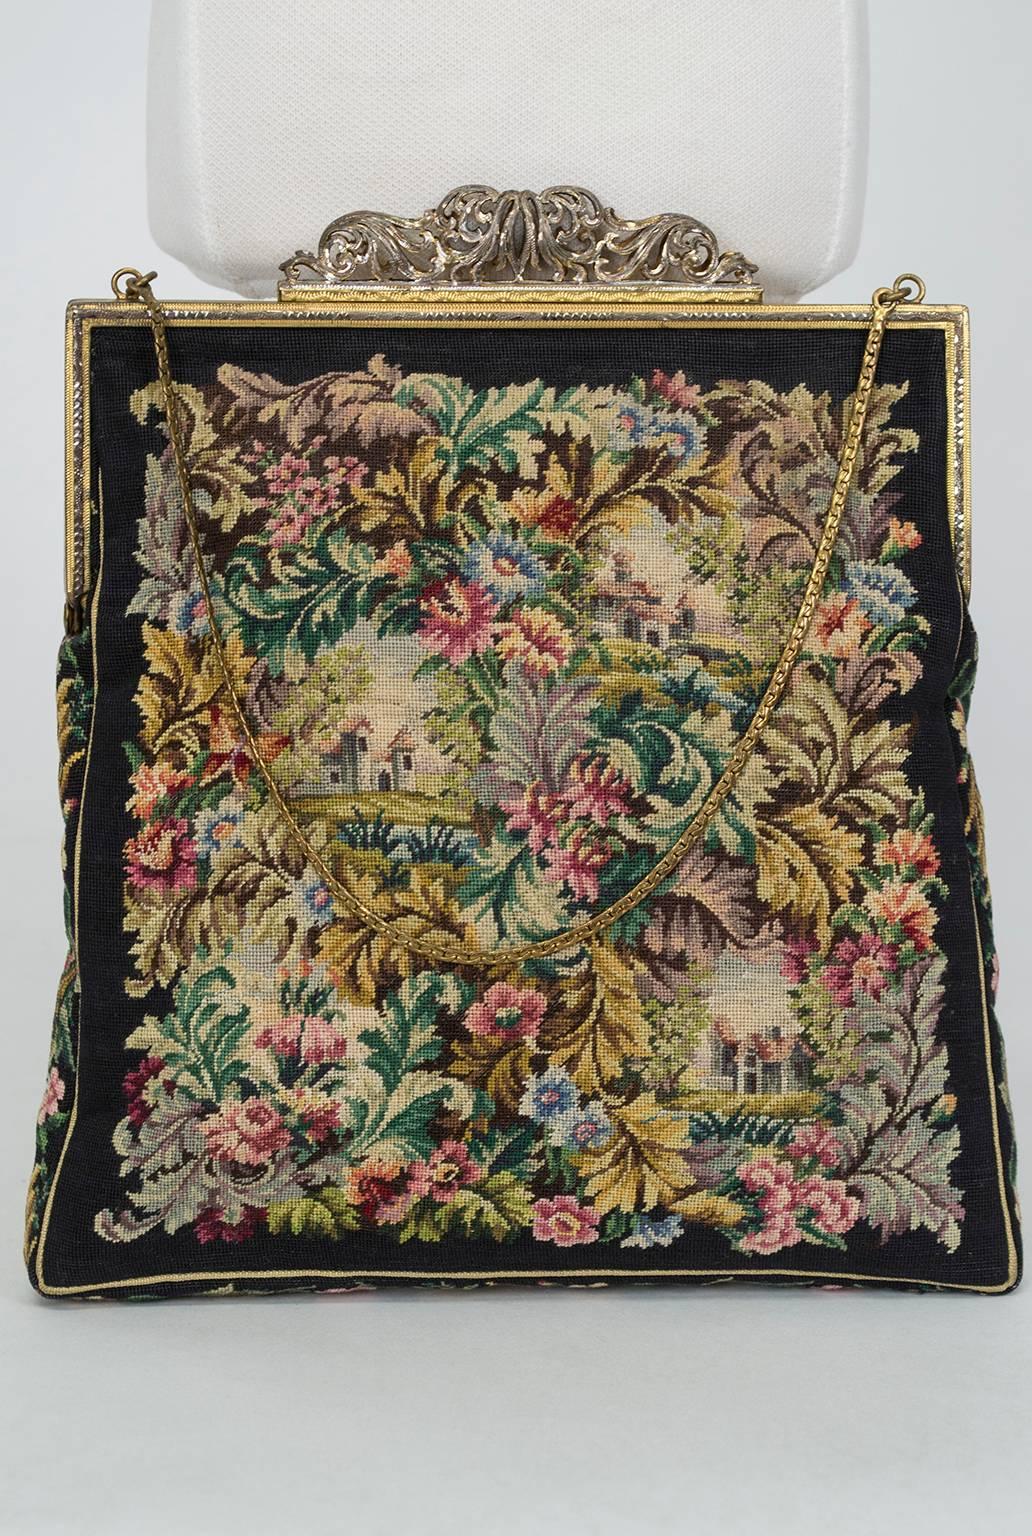 From the Victorian era through the 1930s, petit point and tapestry handbags enjoyed overwhelming popularity among the fashionable set, with the finest examples containing a minimum of 900 stitches per square inch. This Austrian model is one of the